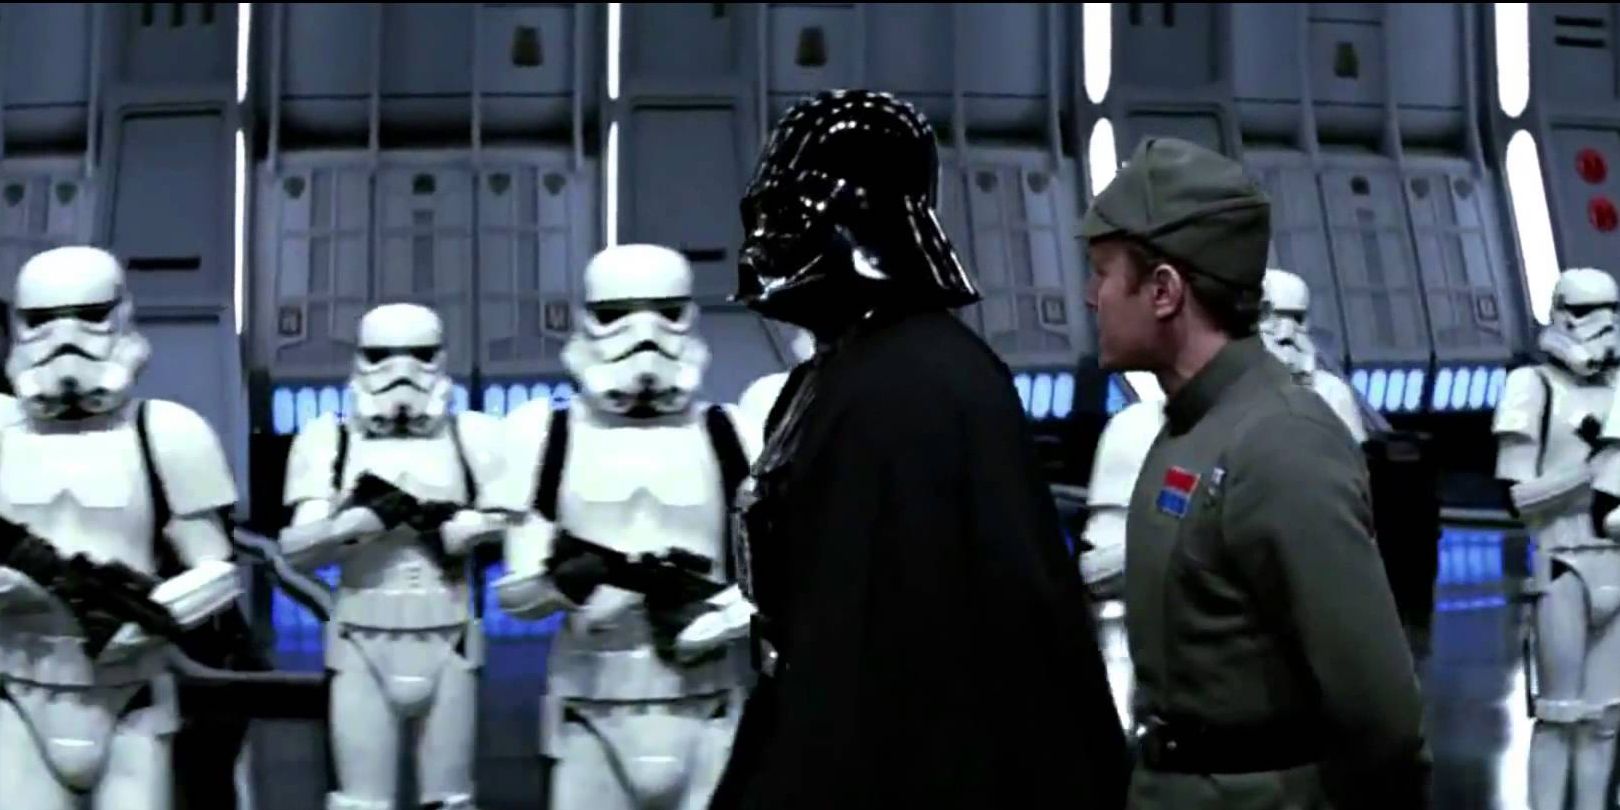 Darth Vader And Imperial Officer walk past Stormtroopers